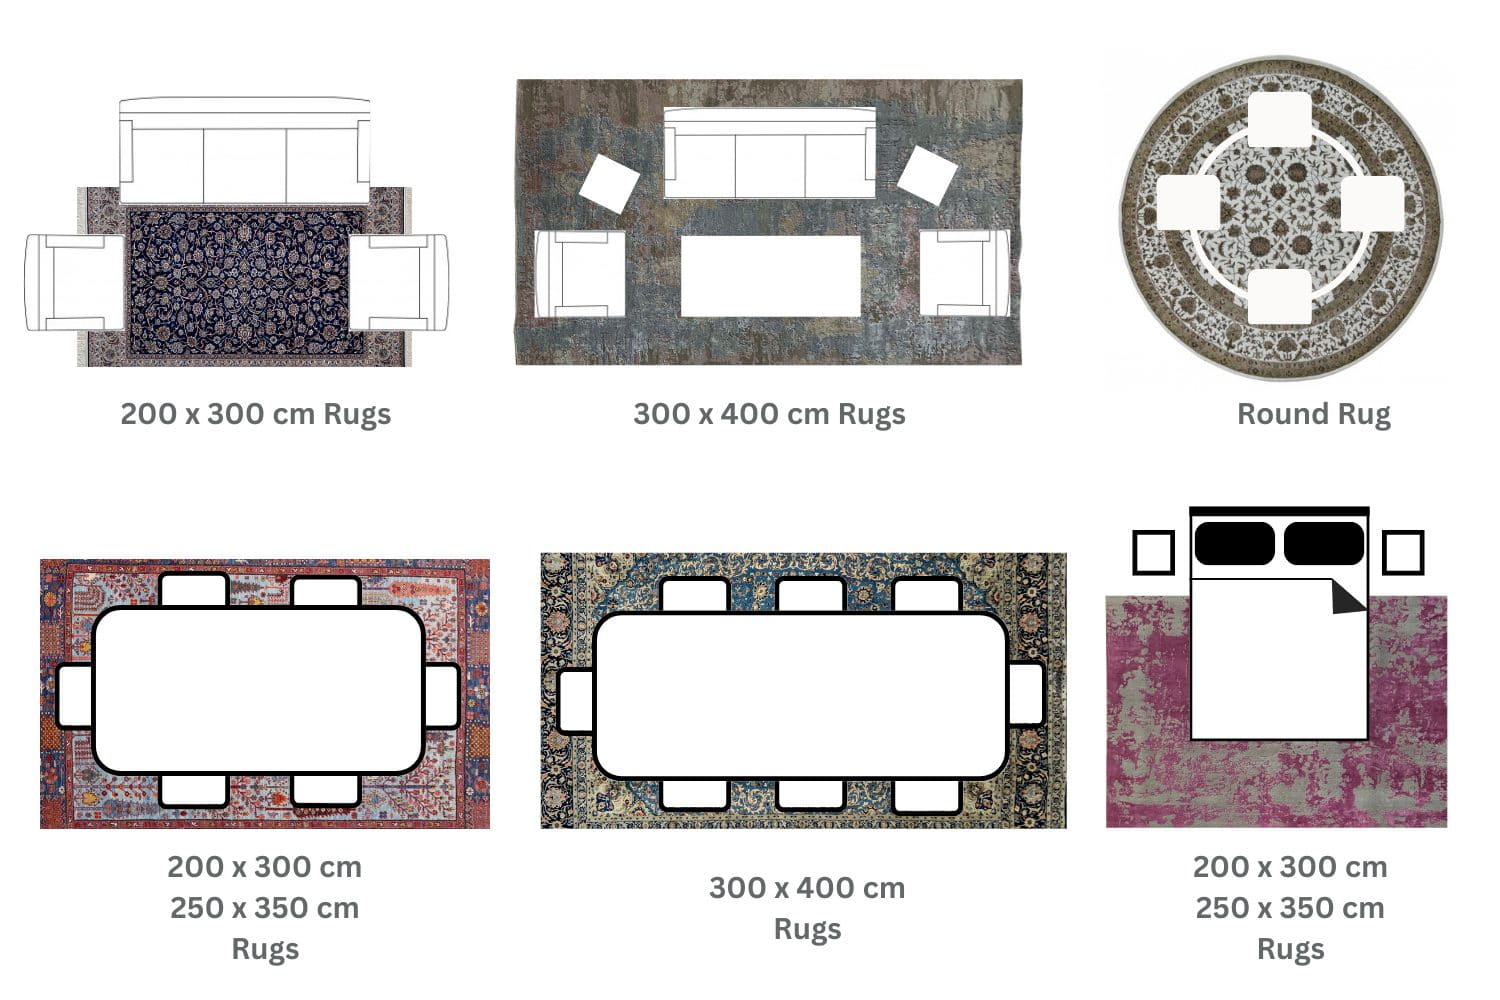 Guide to the placement of rugs